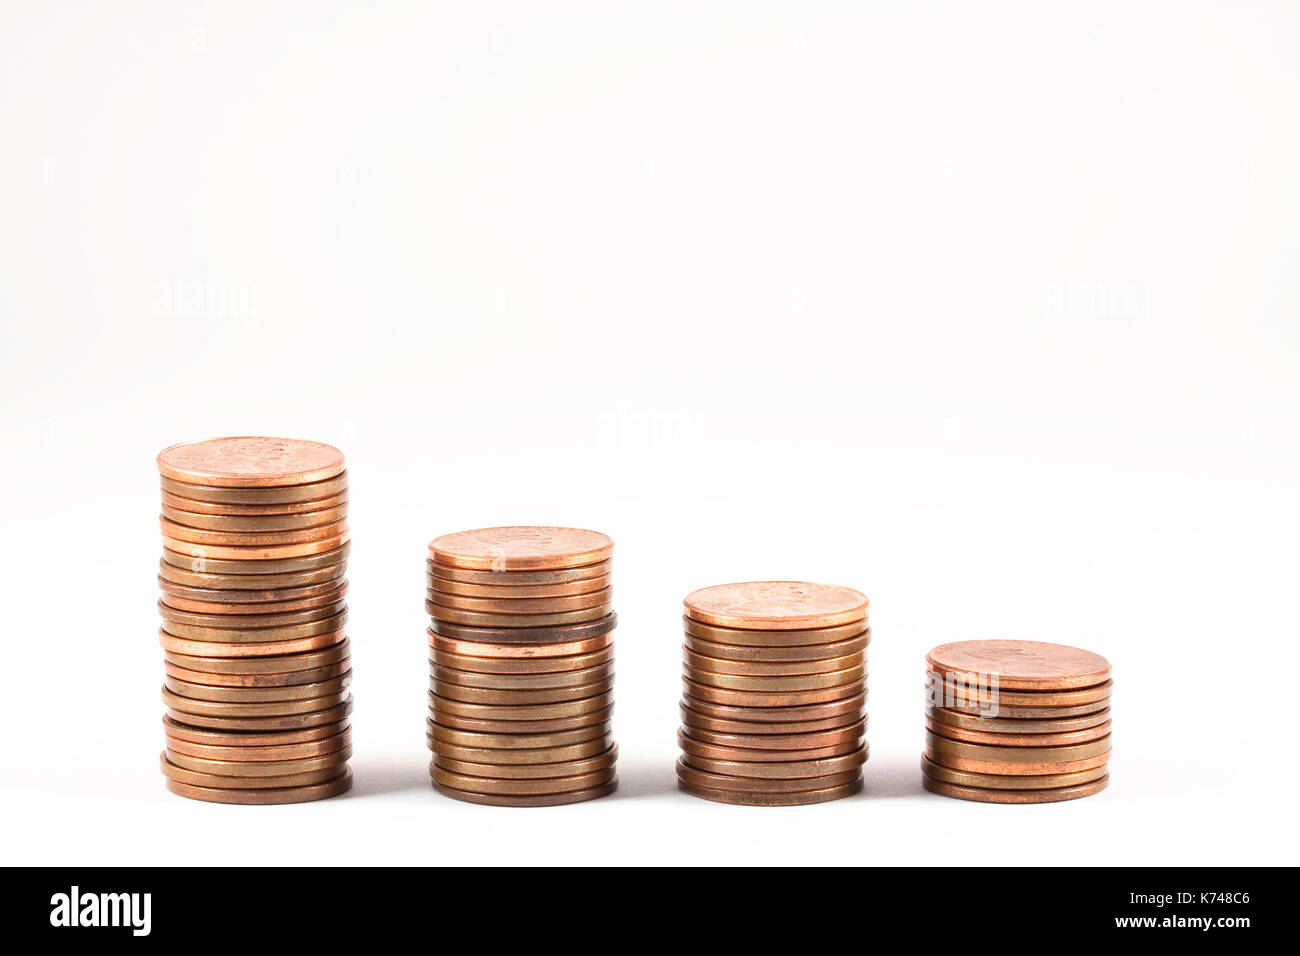 Stacks of pennies forming a graph Stock Photo